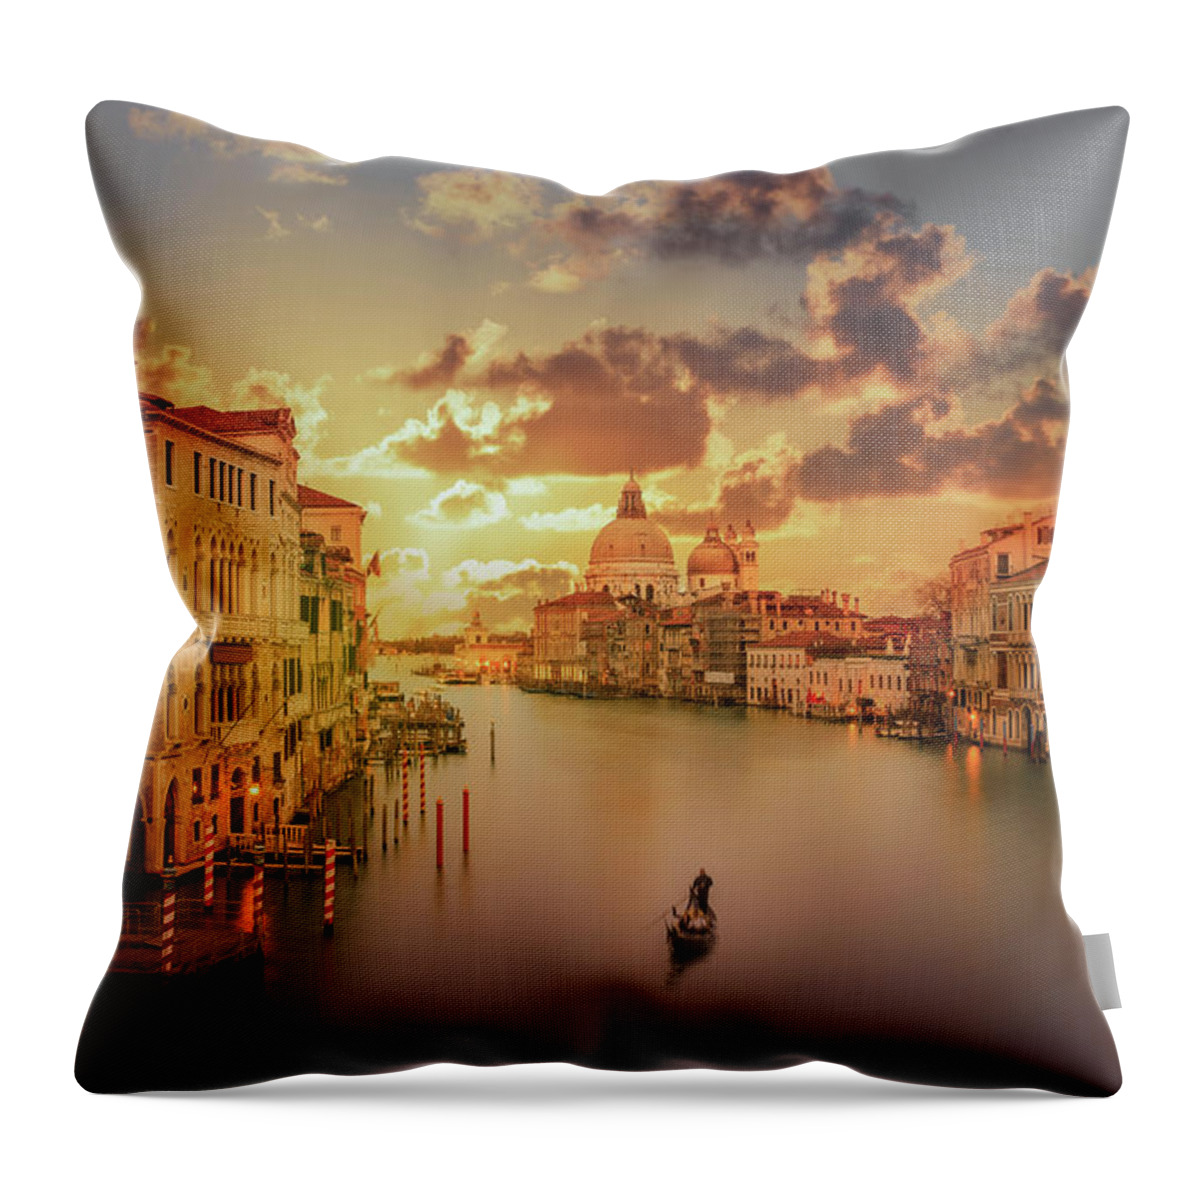 Tranquility Throw Pillow featuring the photograph Gondola In The Grand Canal At Sunset by Buena Vista Images